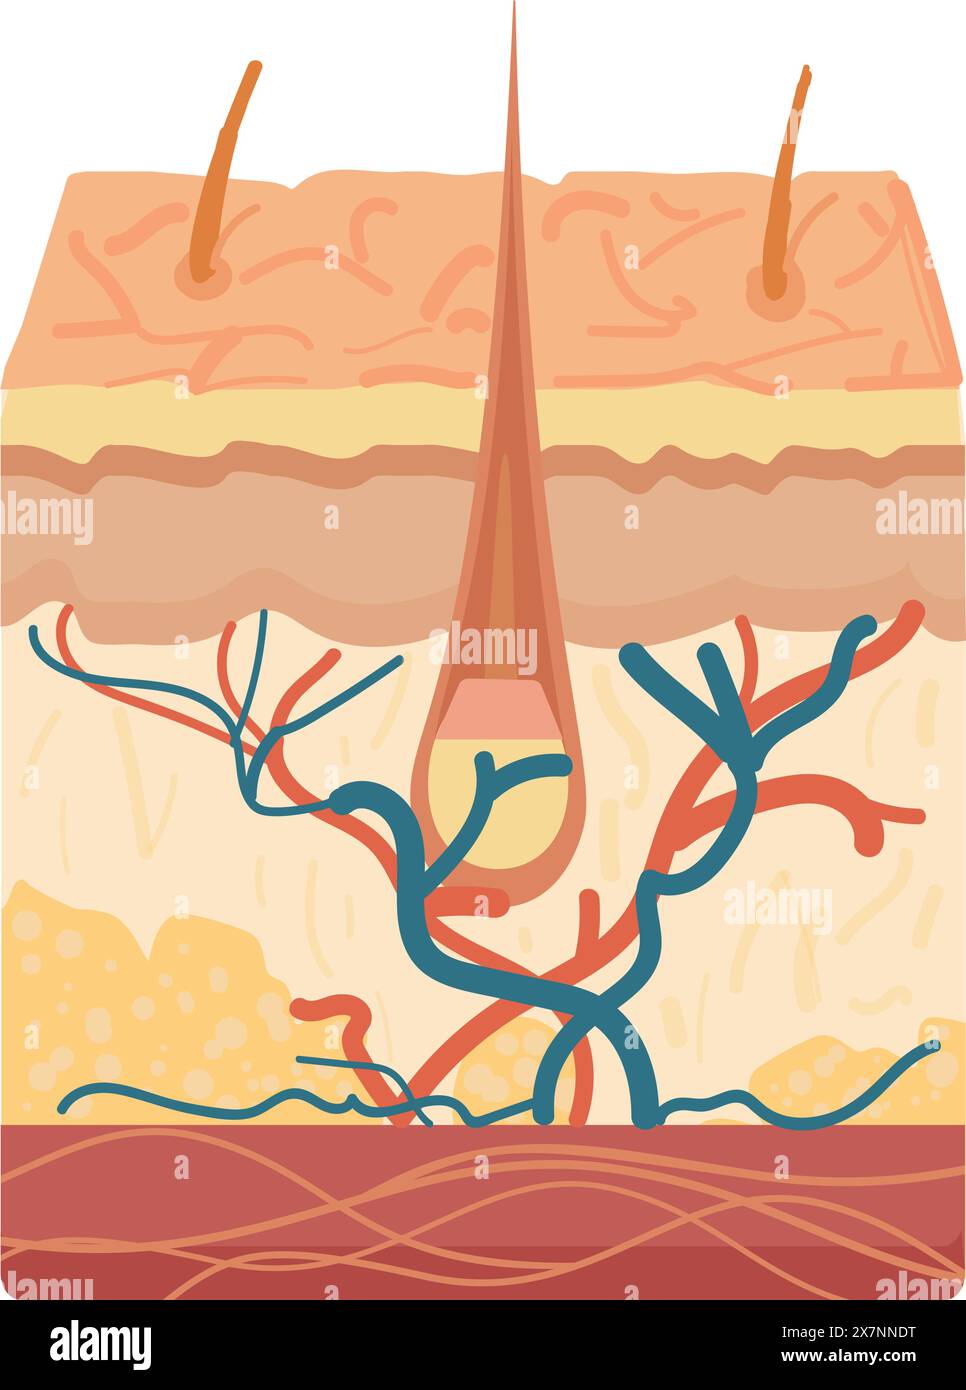 Soil layers diagram with plant roots Stock Vector